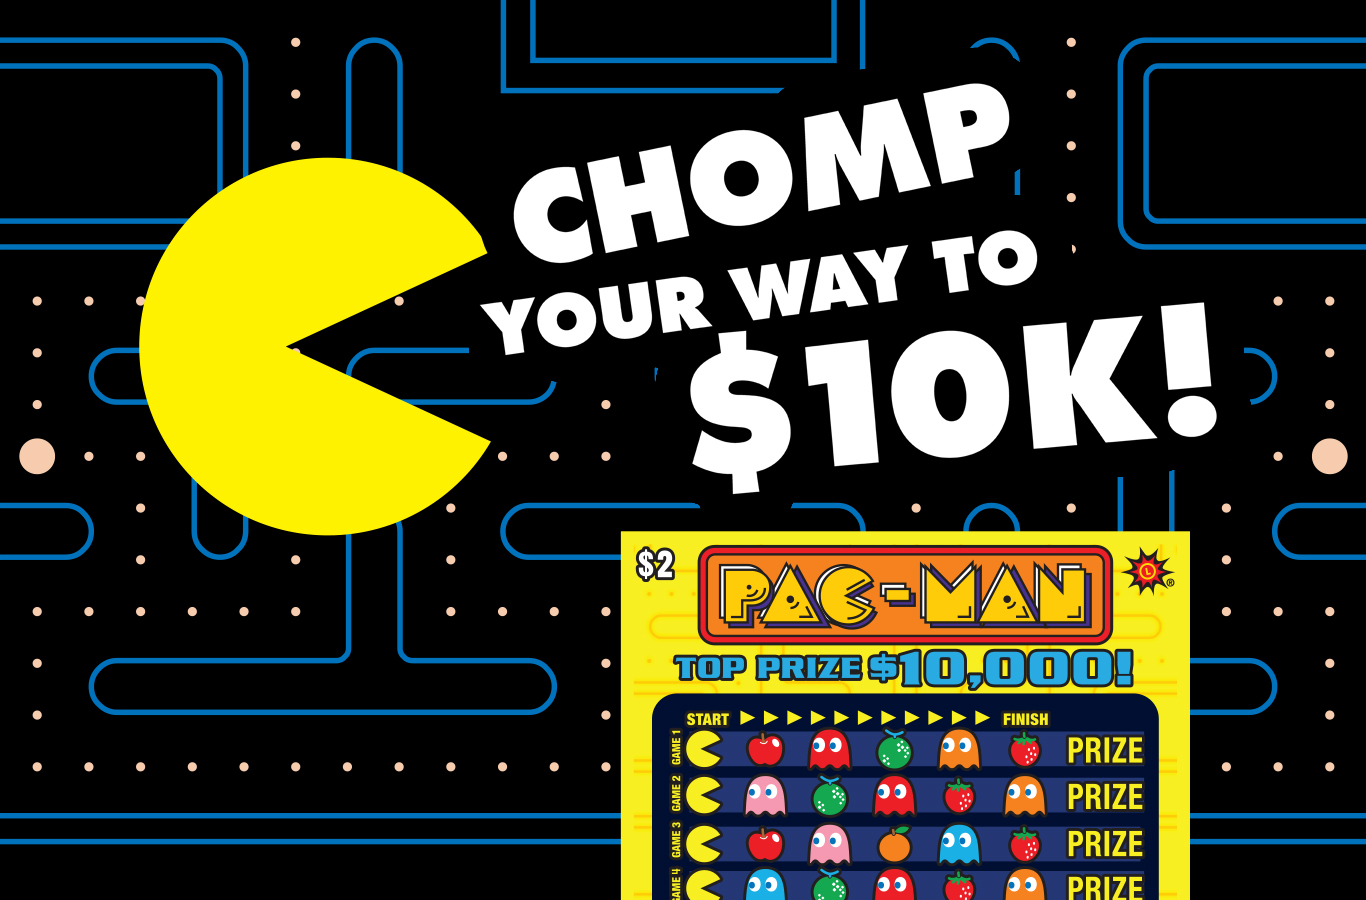 The all-time favorite video game is now an all-time fun scratch-off. The top prize is $10,000, plus enter to win a Pac-Man arcade machine. Waka waka your way to $10k!